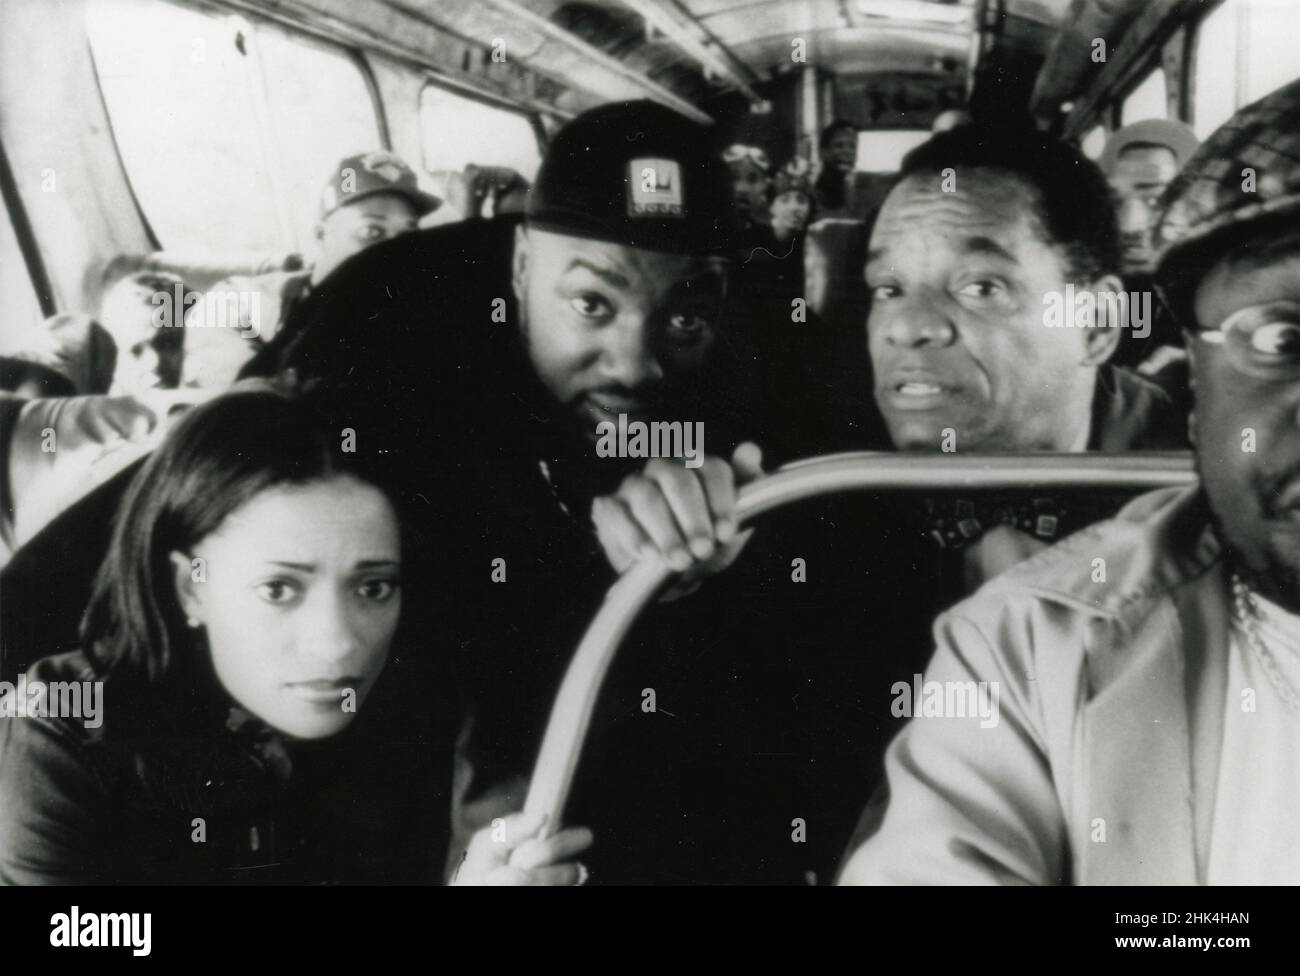 Actors Melissa de Sousa, Malik Yoba, Cedric the Entertainer, and John Witherspoon in the movie Ride, USA 1998 Stock Photo